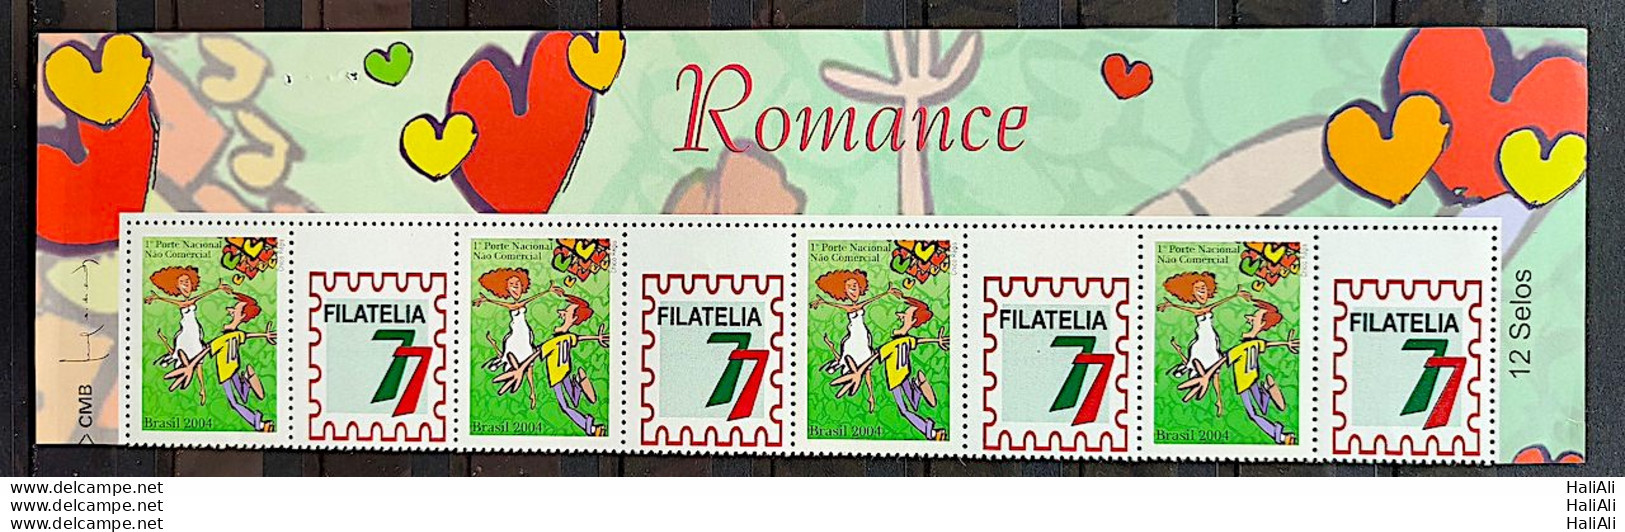 C 2558 Brazil Personalized Stamp Romance Hug 2004 3 With Vignette - Personalized Stamps